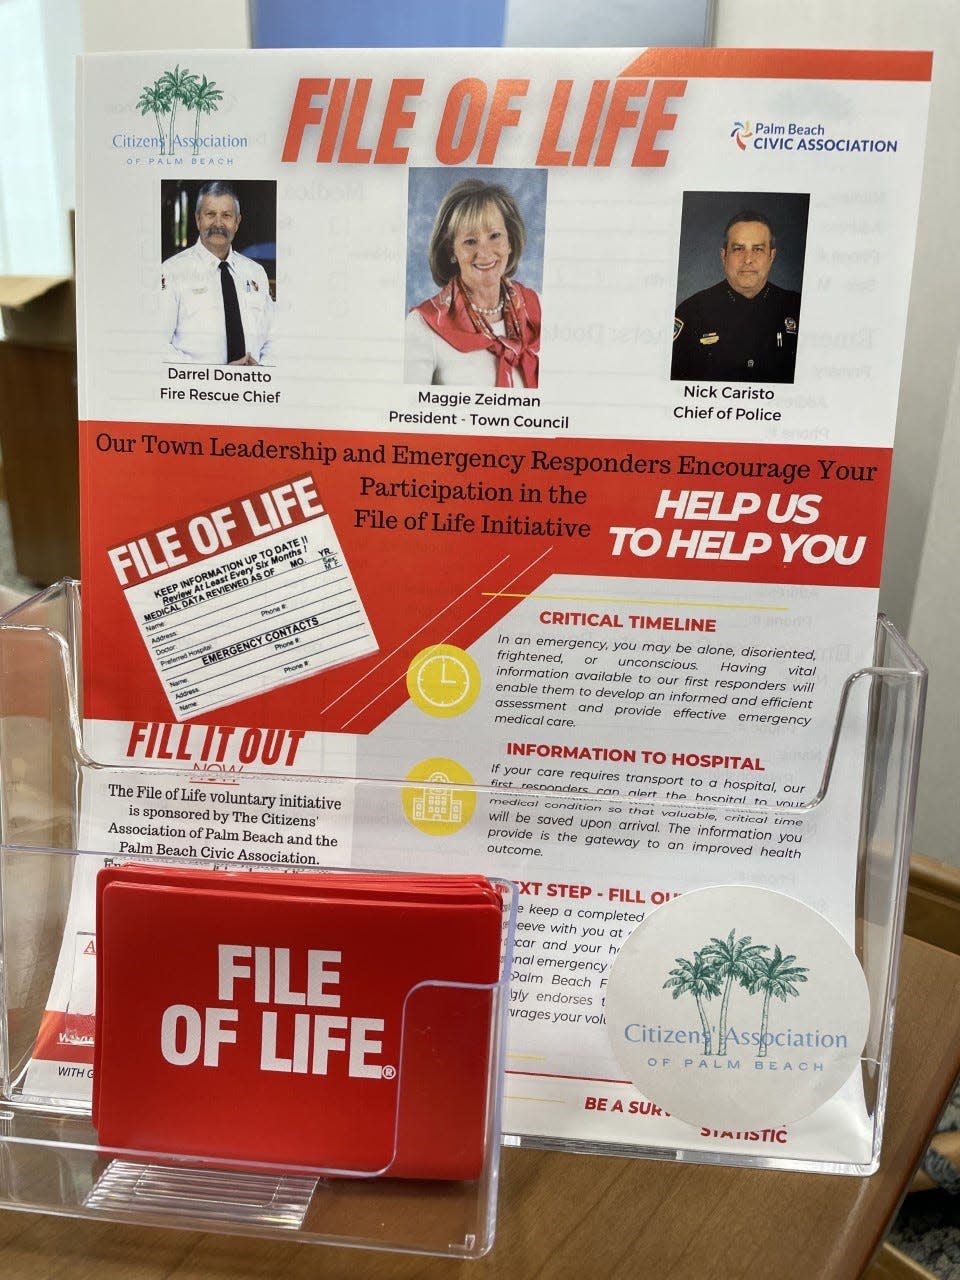 File of Life forms are available at locations throughout the town, and include space for residents to write down their medical information.